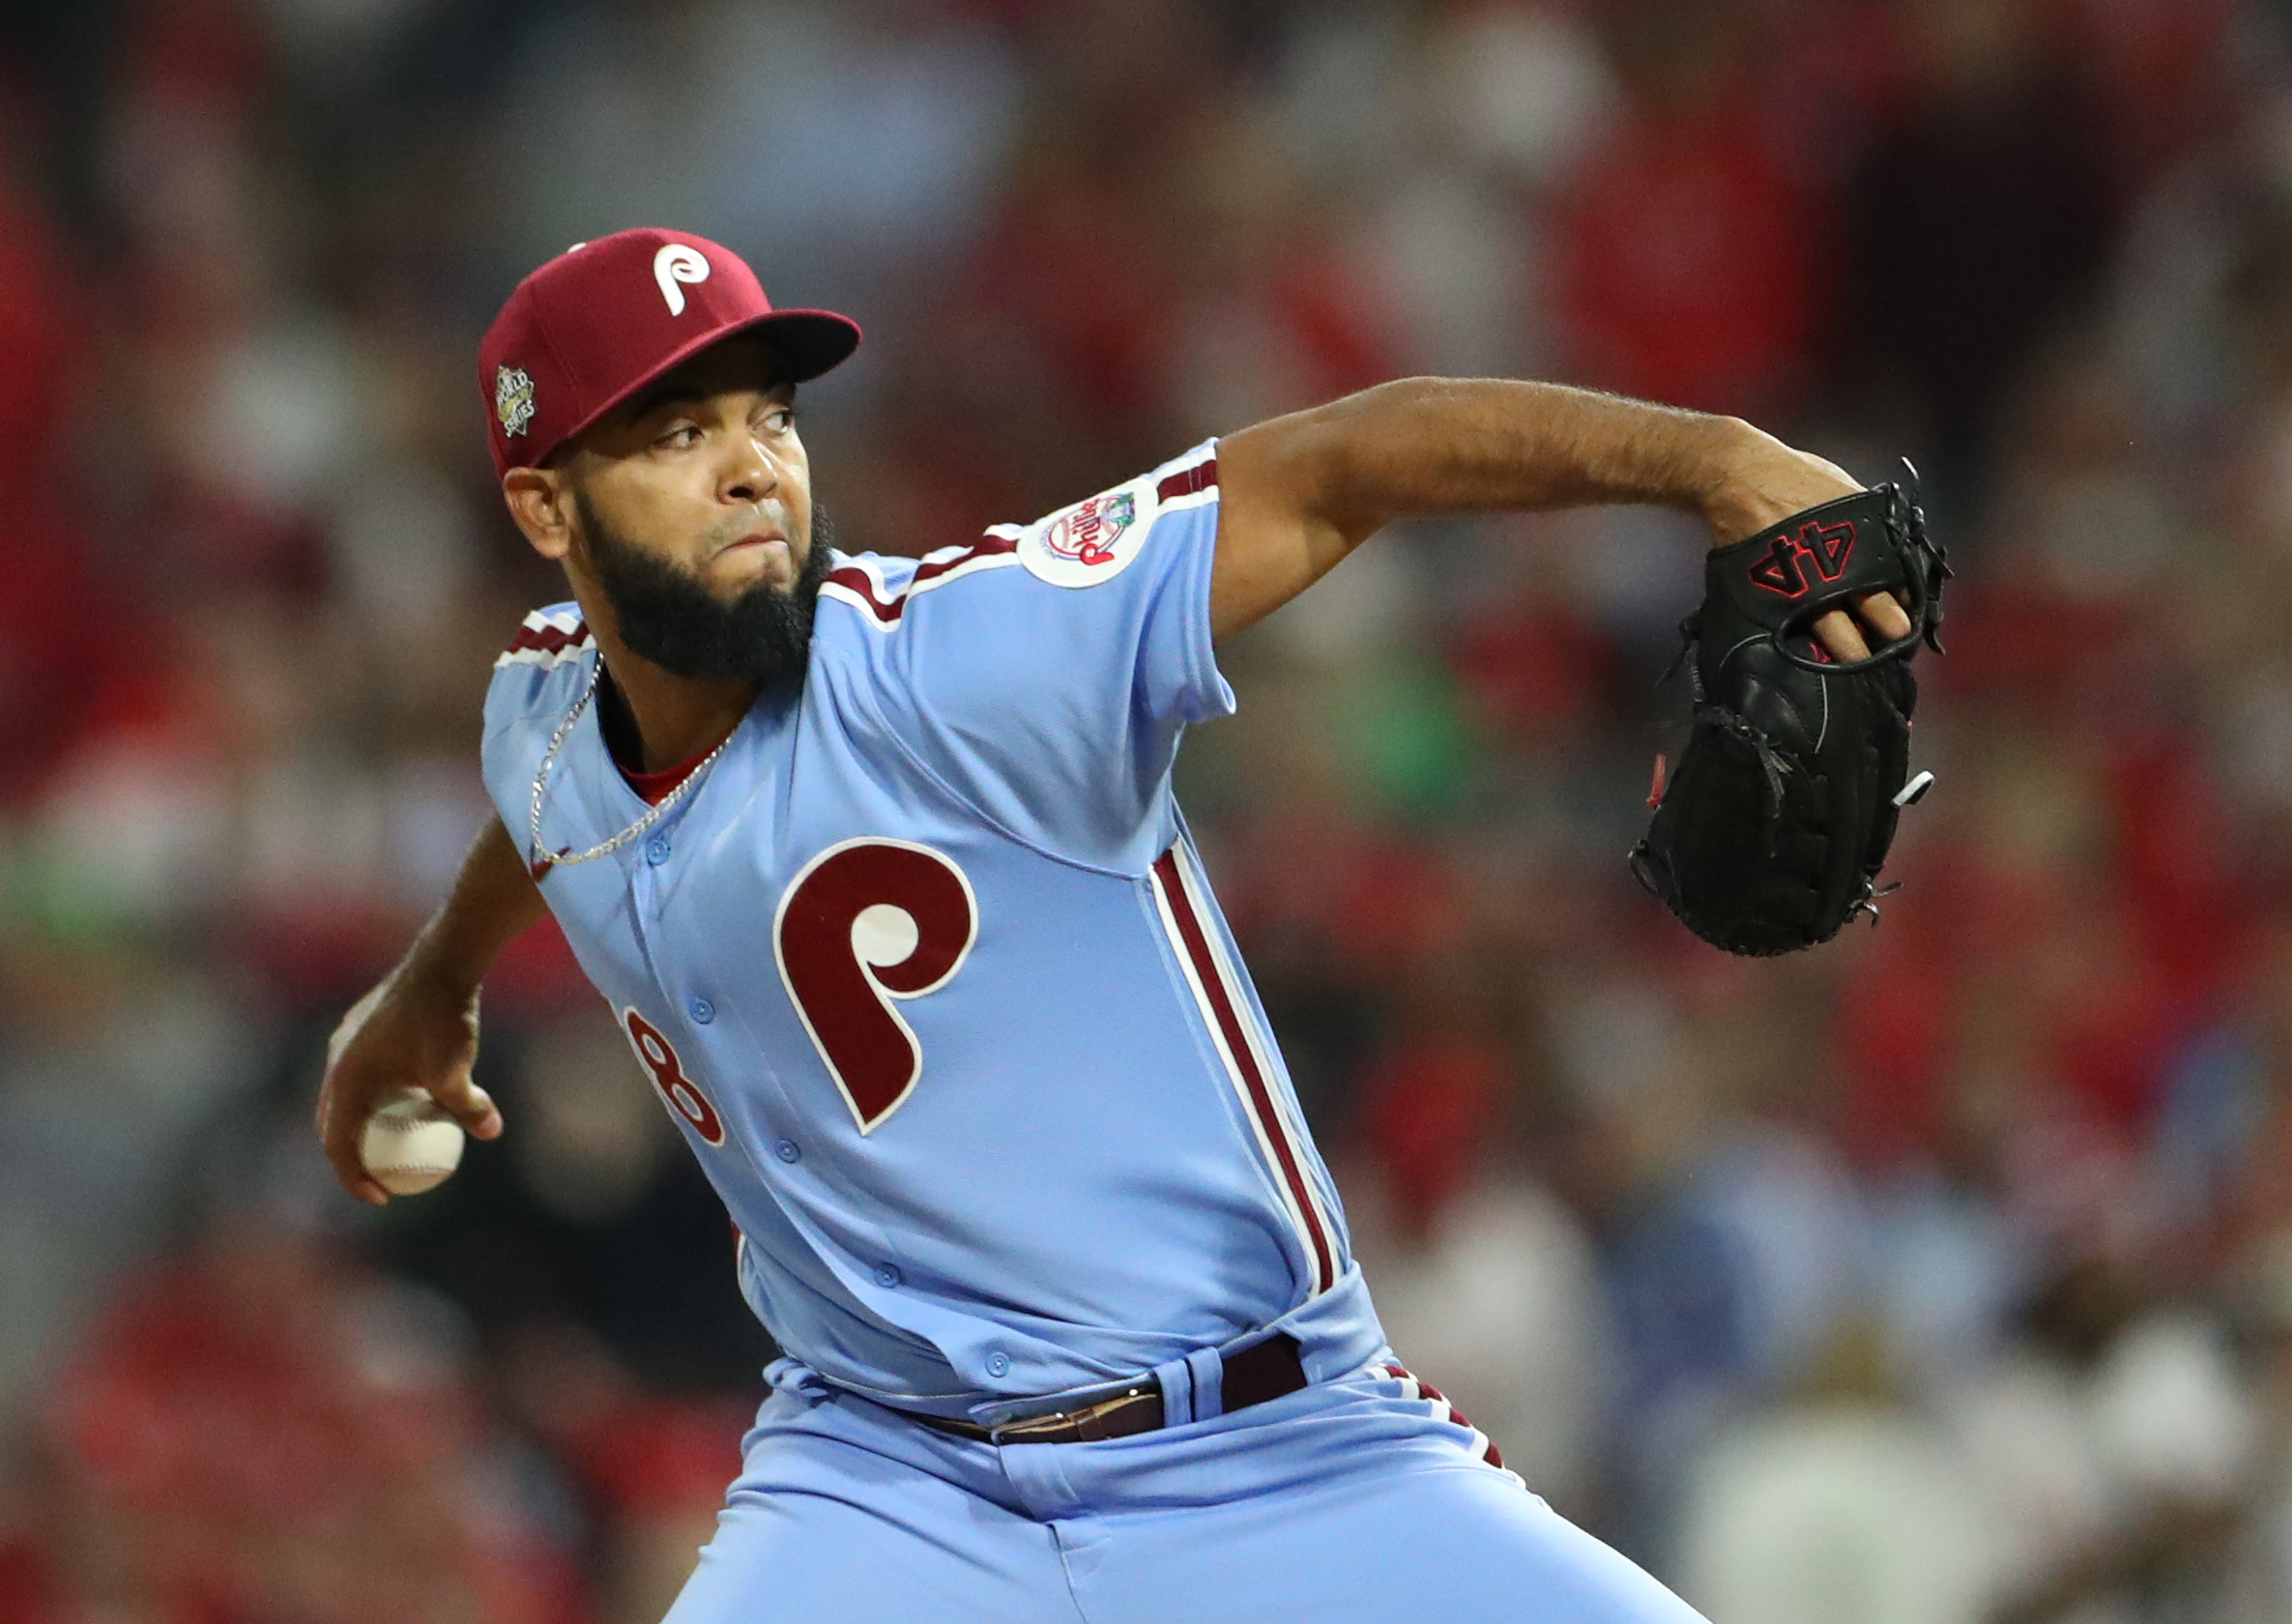 LOOK: The Phillies' 1980s powder-blue throwbacks are beautiful and